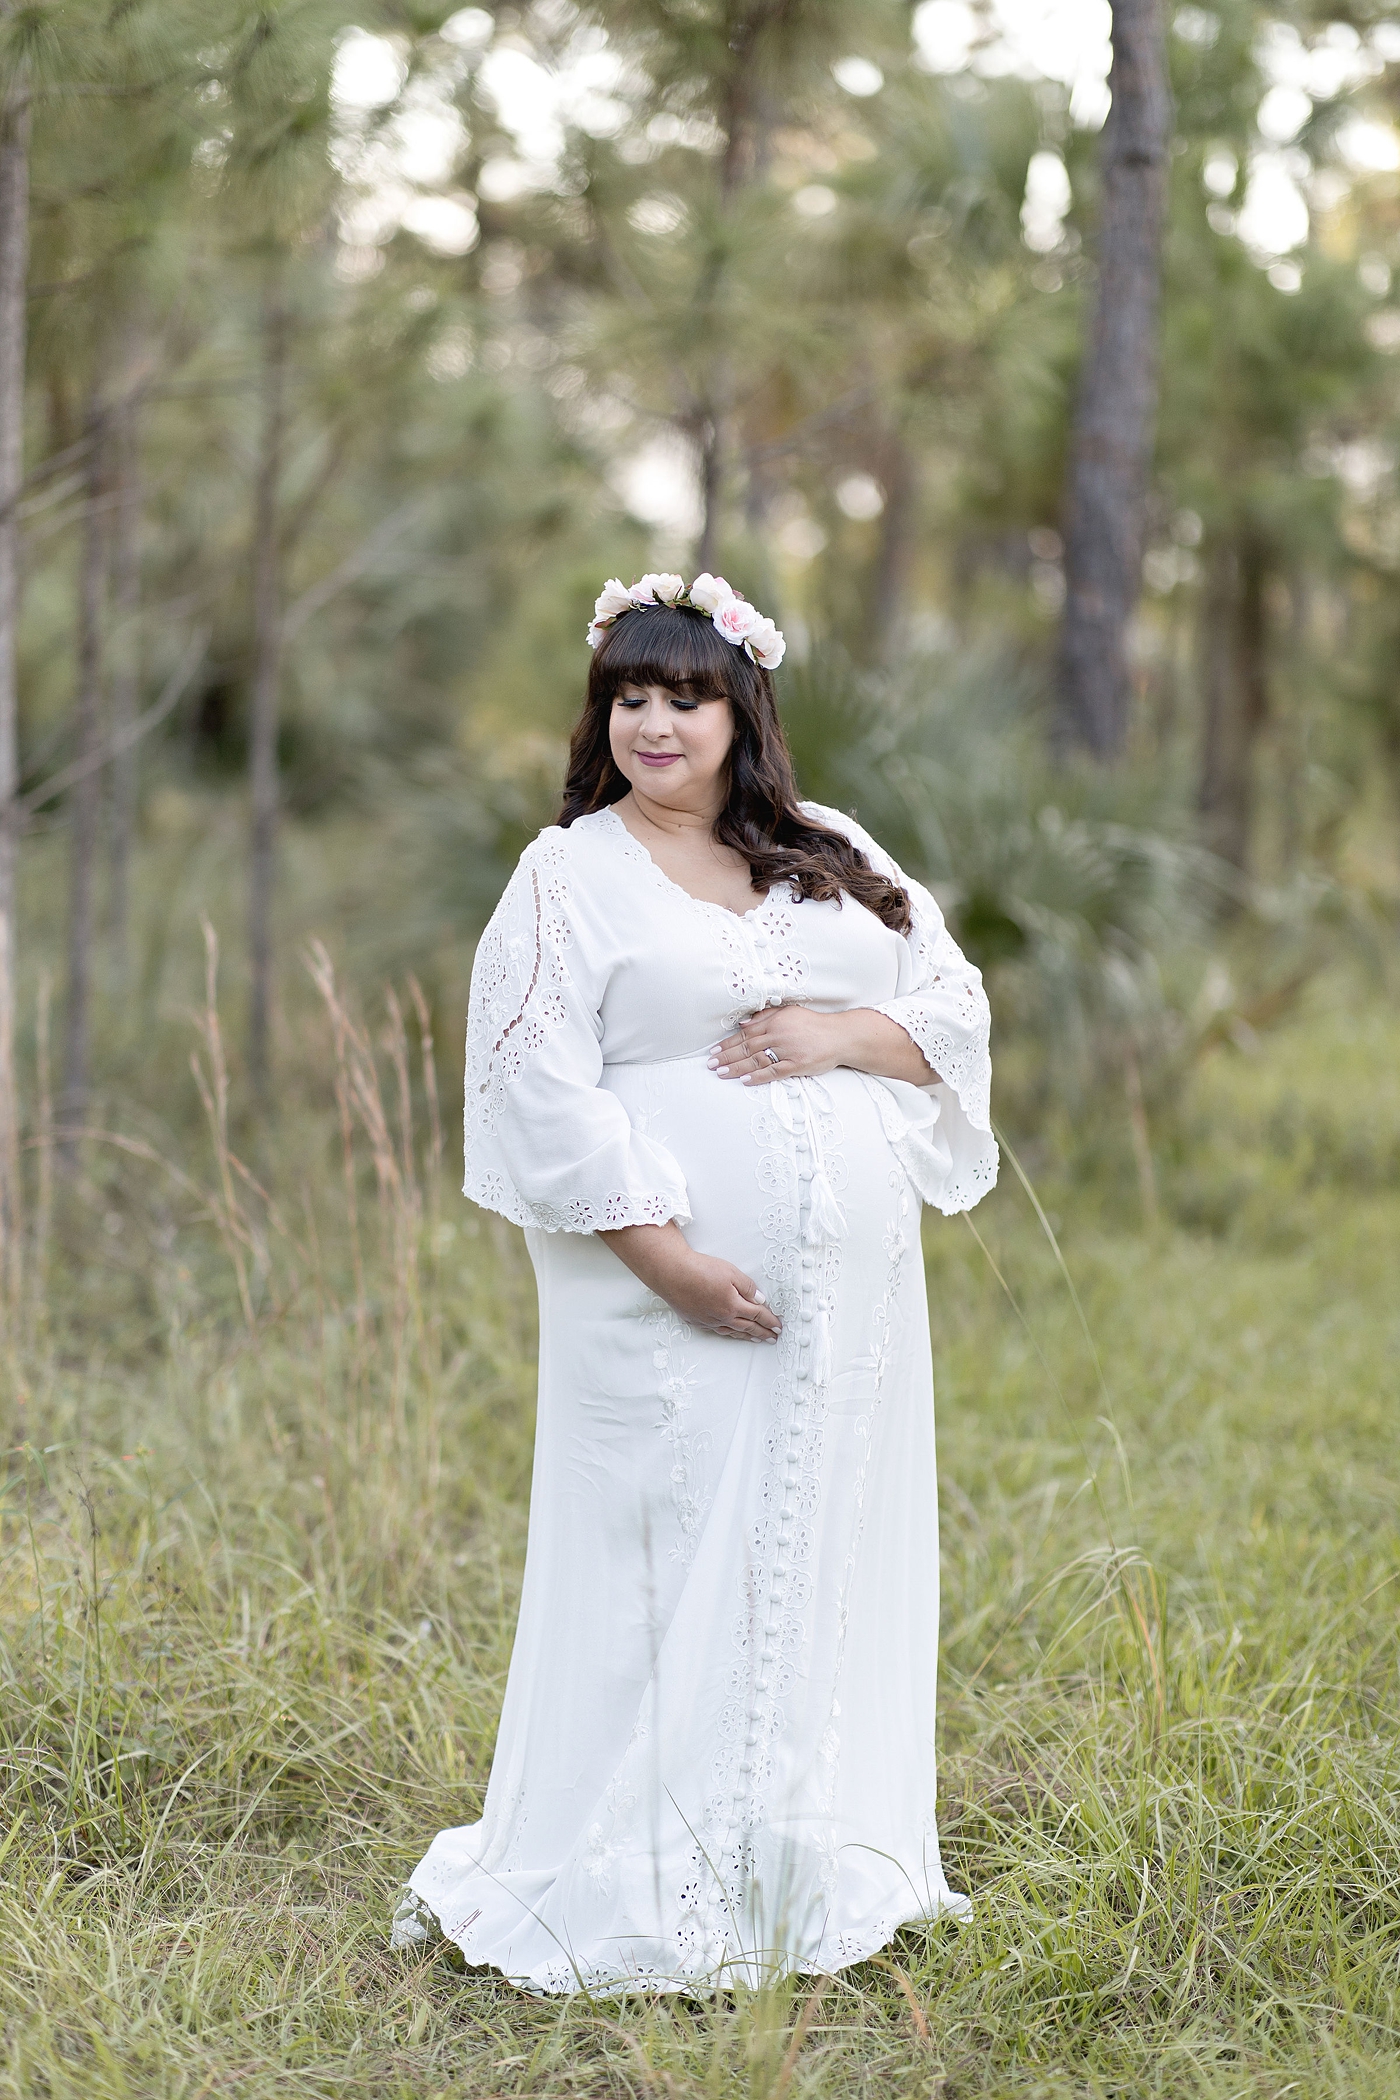 Mom to be embraces belly during mother nature inspired maternity session. Photo by South Florida Maternity Photographer Ivanna Vidal Photography.